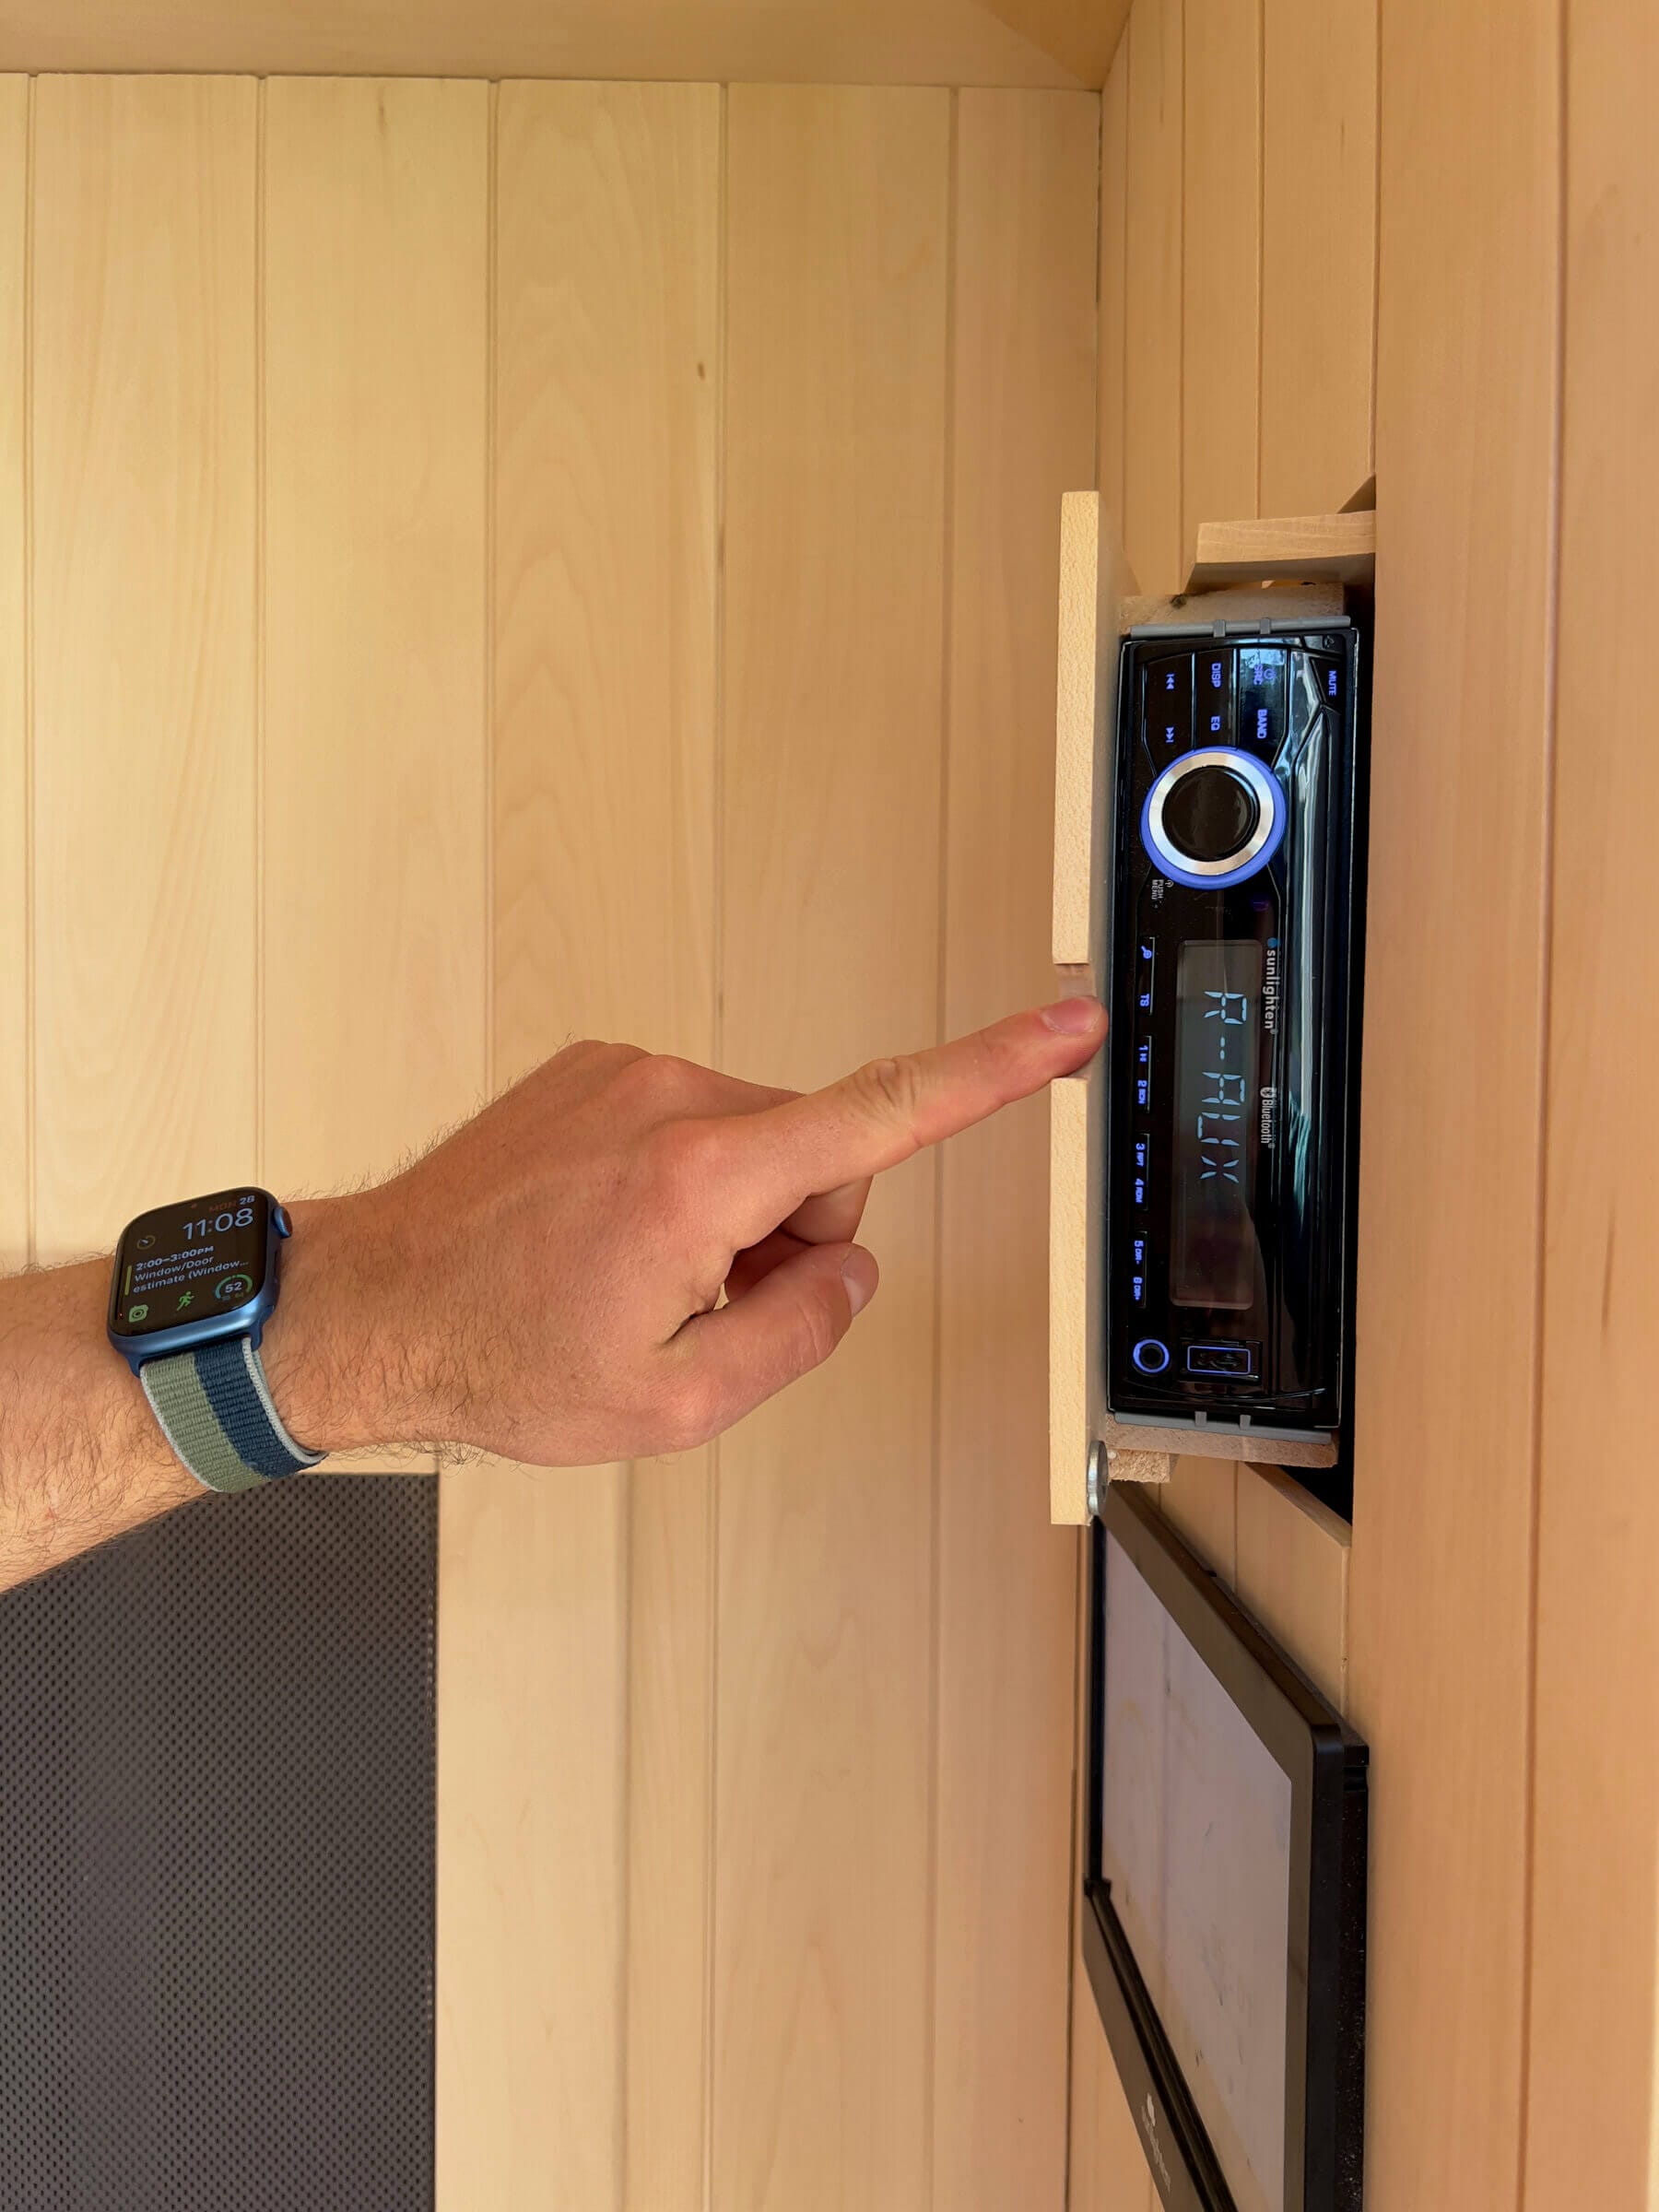 The previous-generation mPulse had an actual car radio built in for volume control, as show above. In the new mPulse Smart Sauna, you control the volume and everything else via the Android tablet.